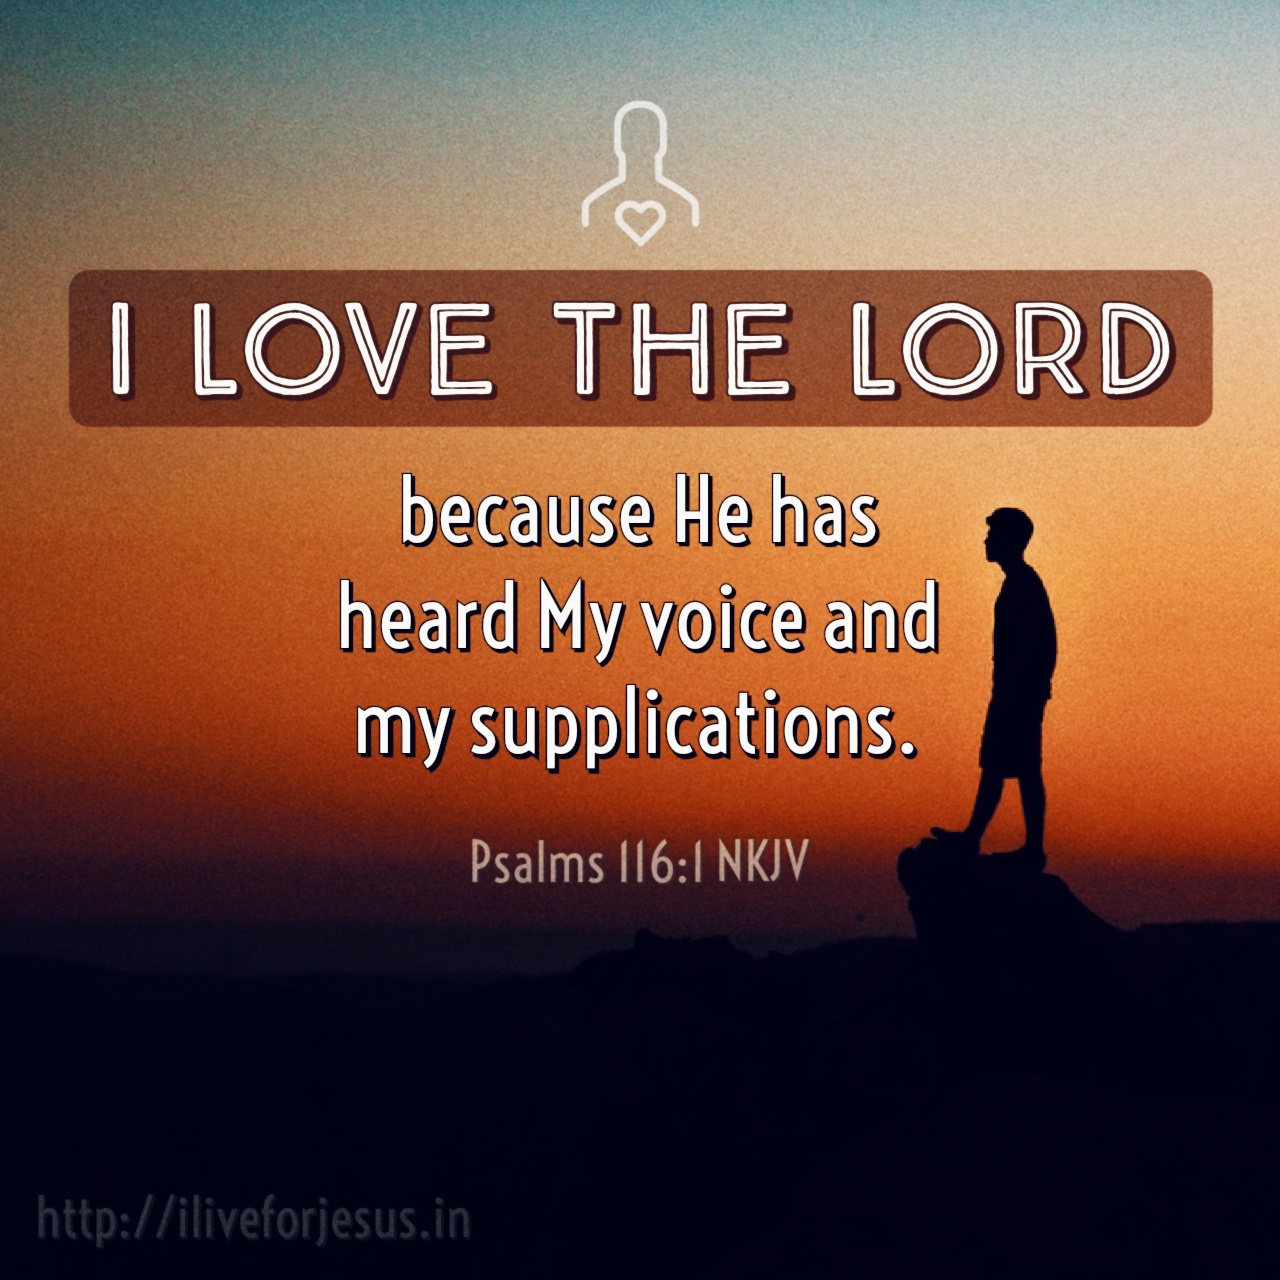 I love the Lord , because He has heard My voice and my supplications. Psalms 116:1 NKJV